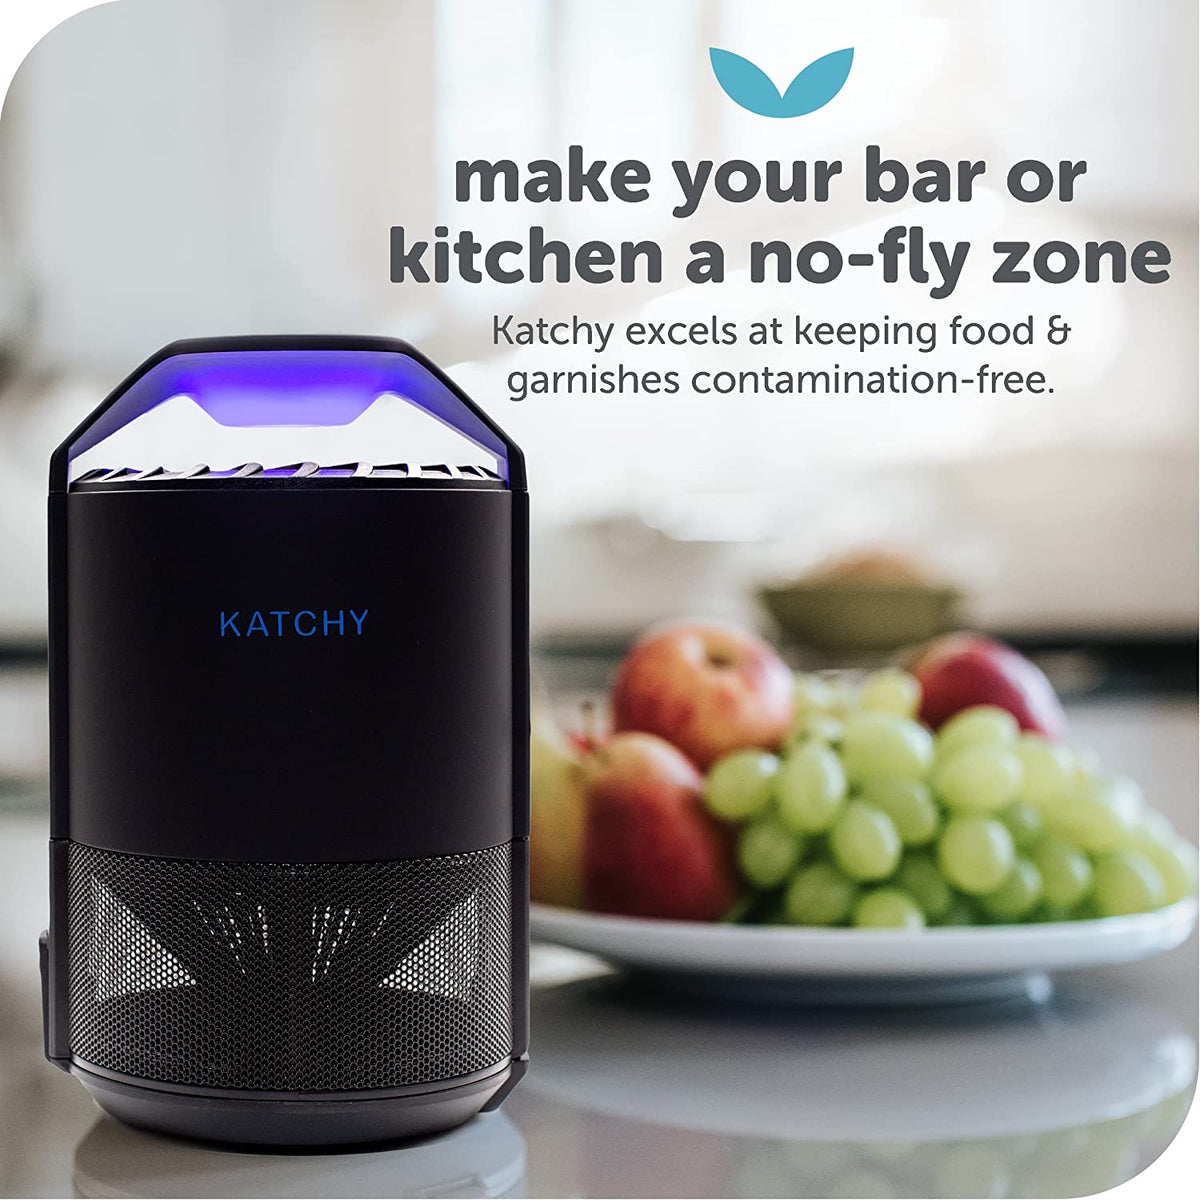 Katchy Indoor Insect Trap - Catcher & Killer for Mosquito, Gnat, Moth, Fruit Flies - Non-Zapper Traps for Buzz-Free Home - Catch Flying Insect Indoors with Suction, Bug Light & Sticky Glue (Black)